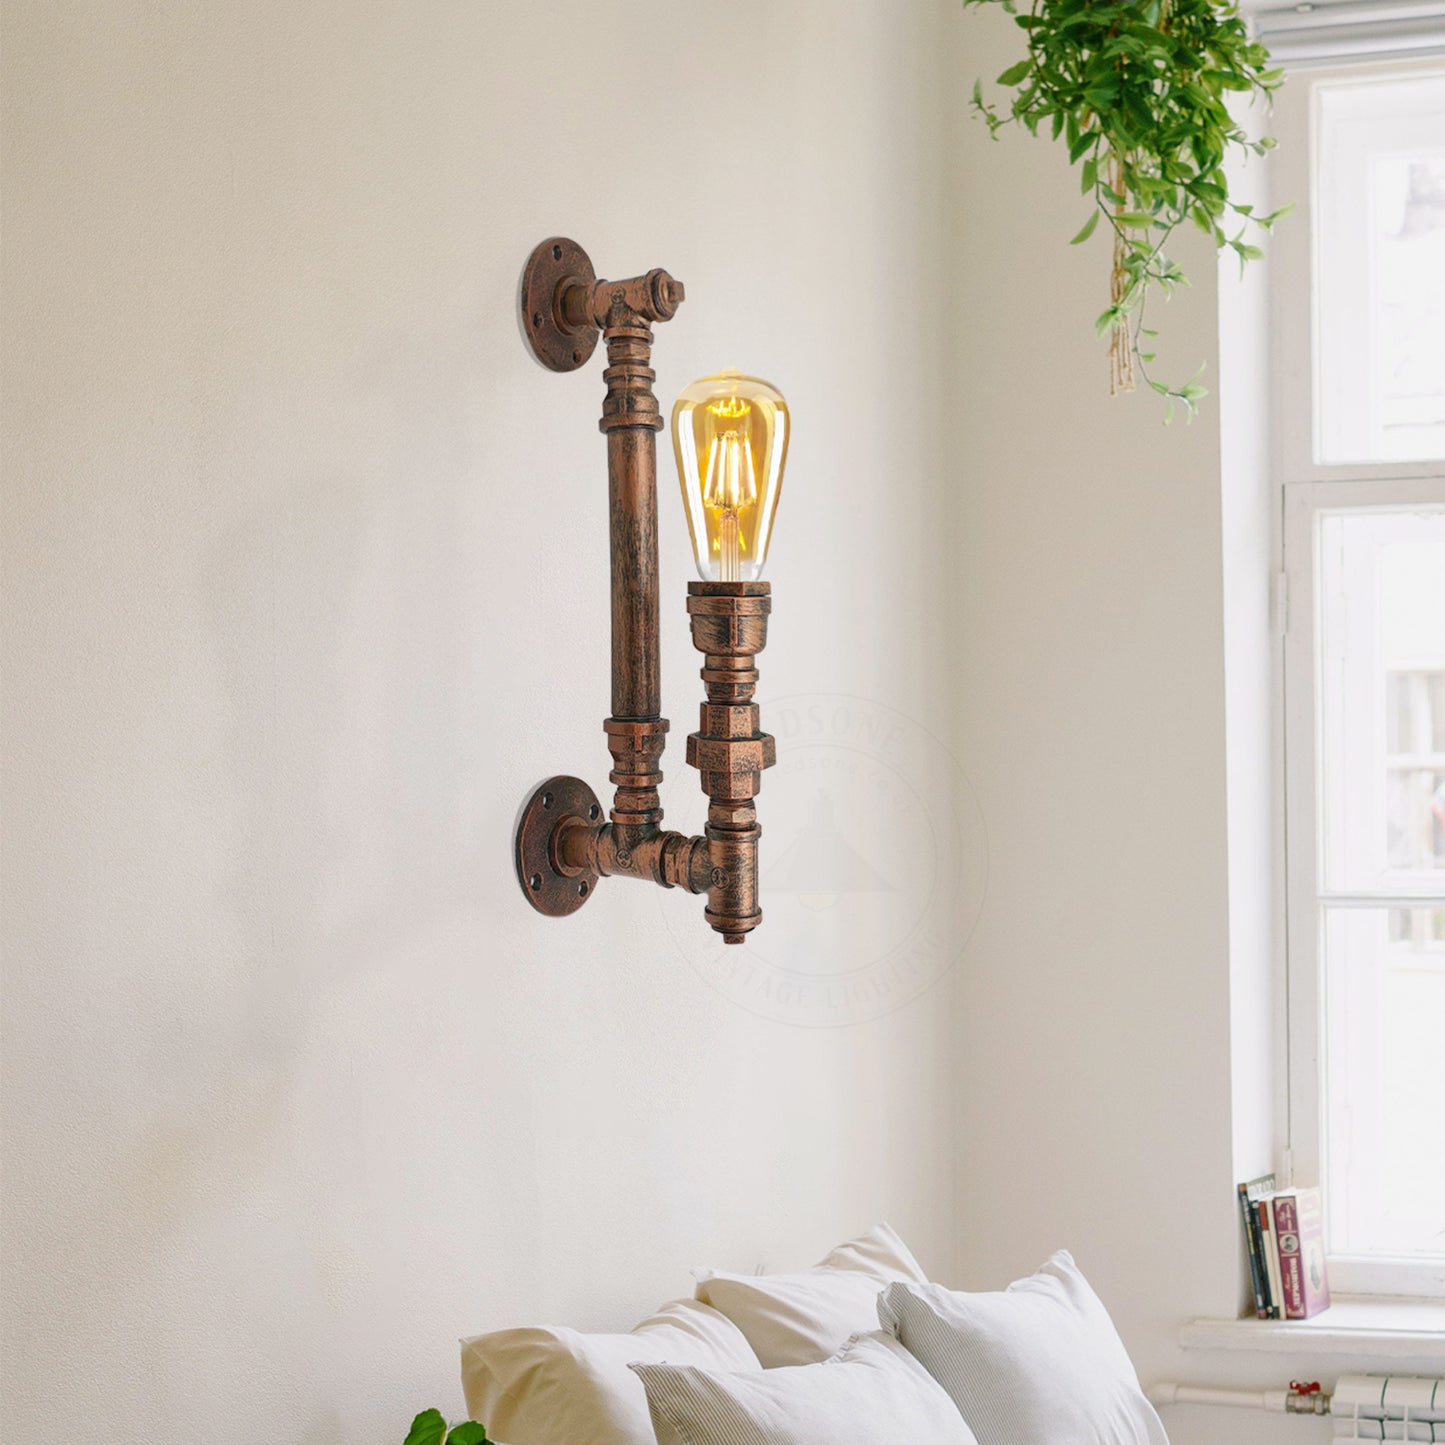 Rustic Red Steampunk Lights & Wall Sconce Light for bed room.JPG